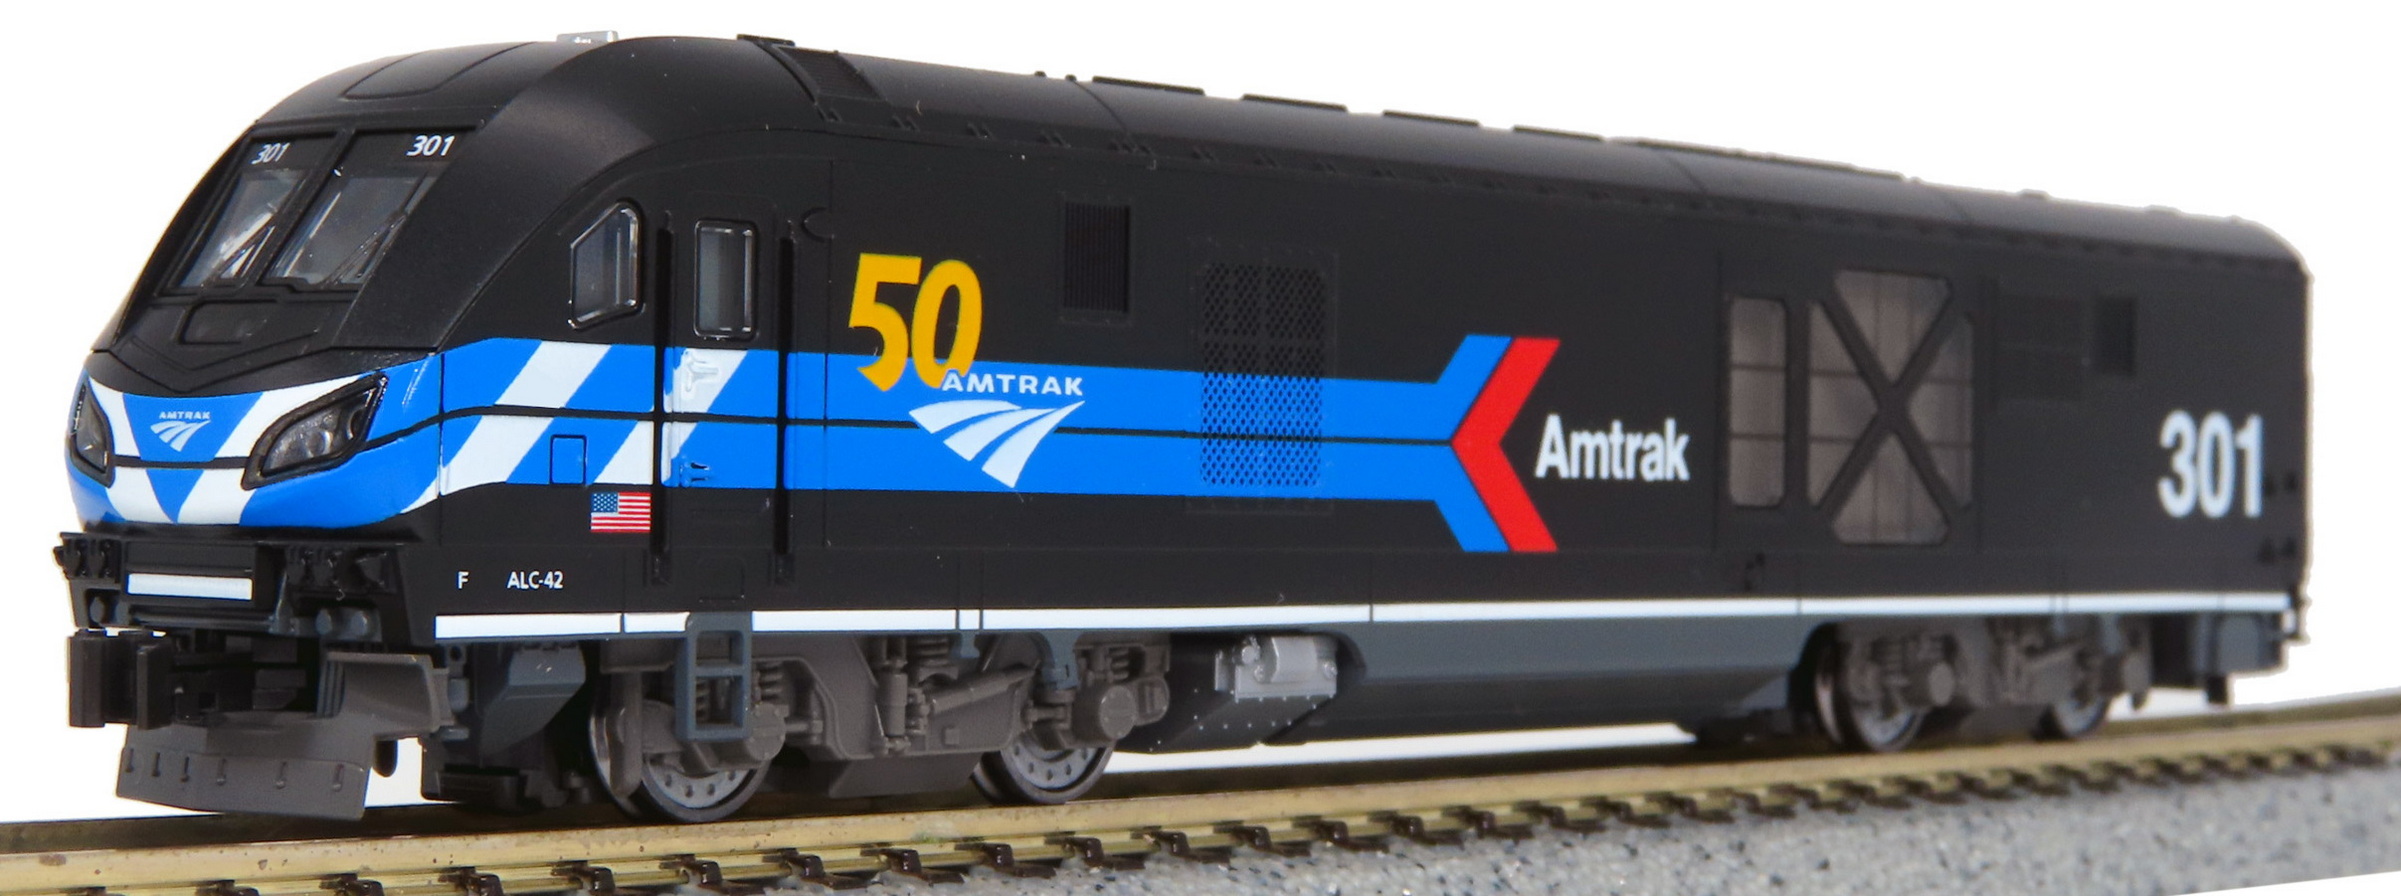 N Scale - Kato USA - 176-6050 - ACL-42 - Amtrak - 301